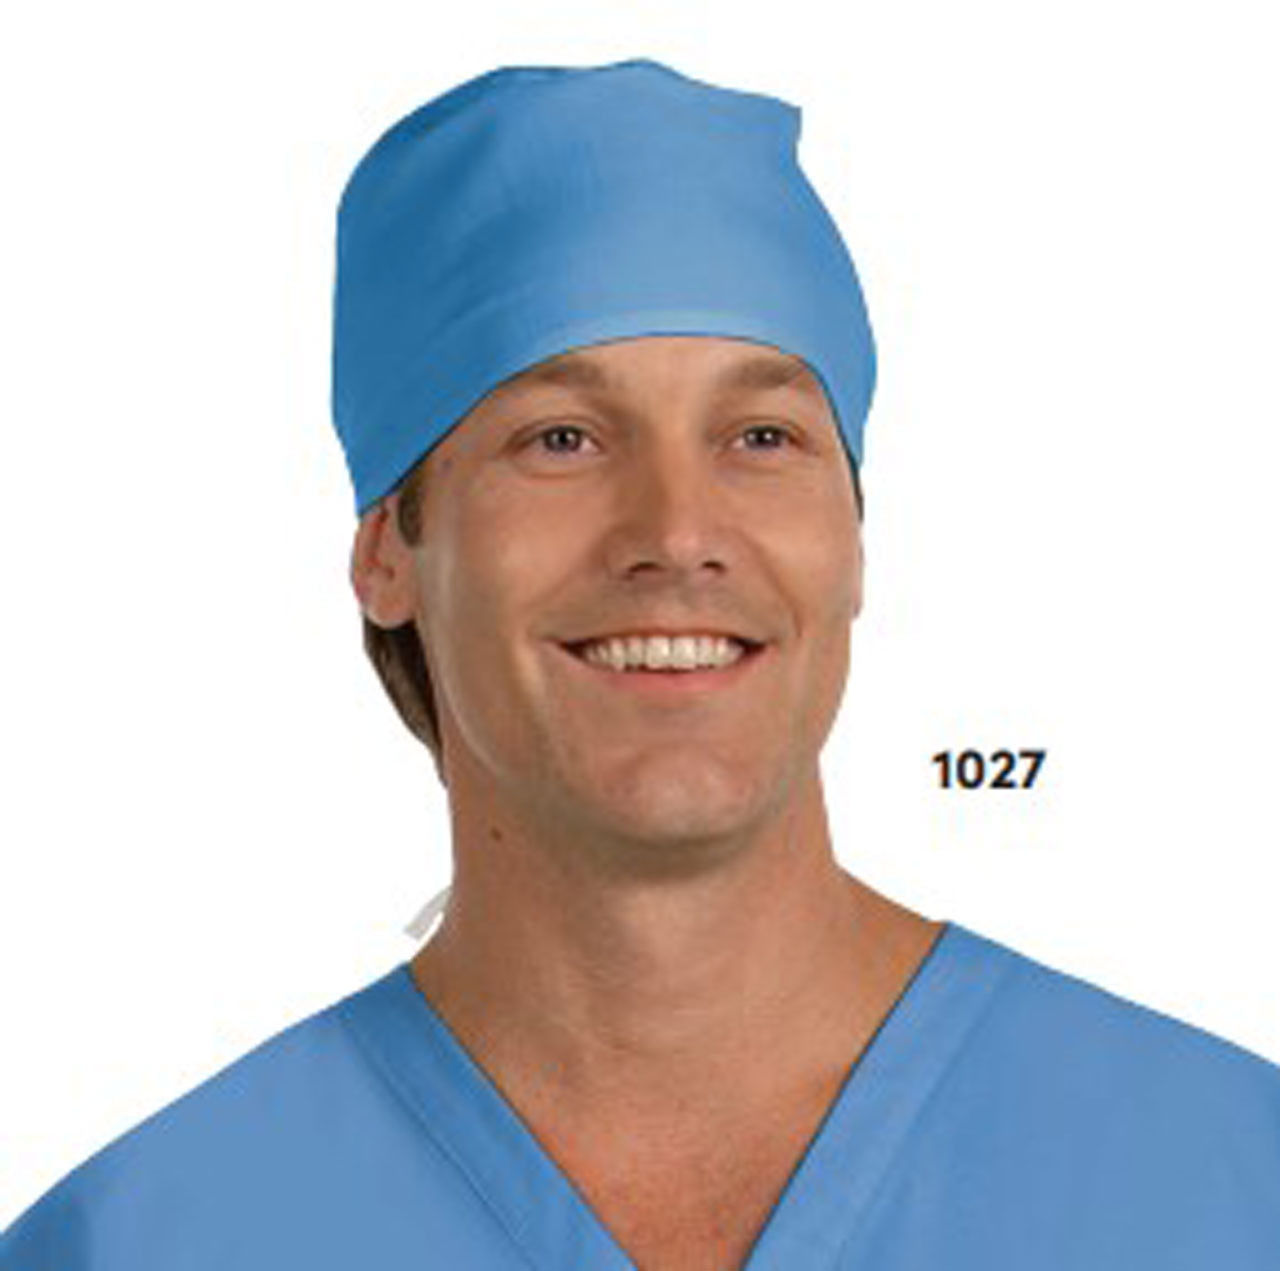 Are these bulk scrub caps a good addition to my work apparel?